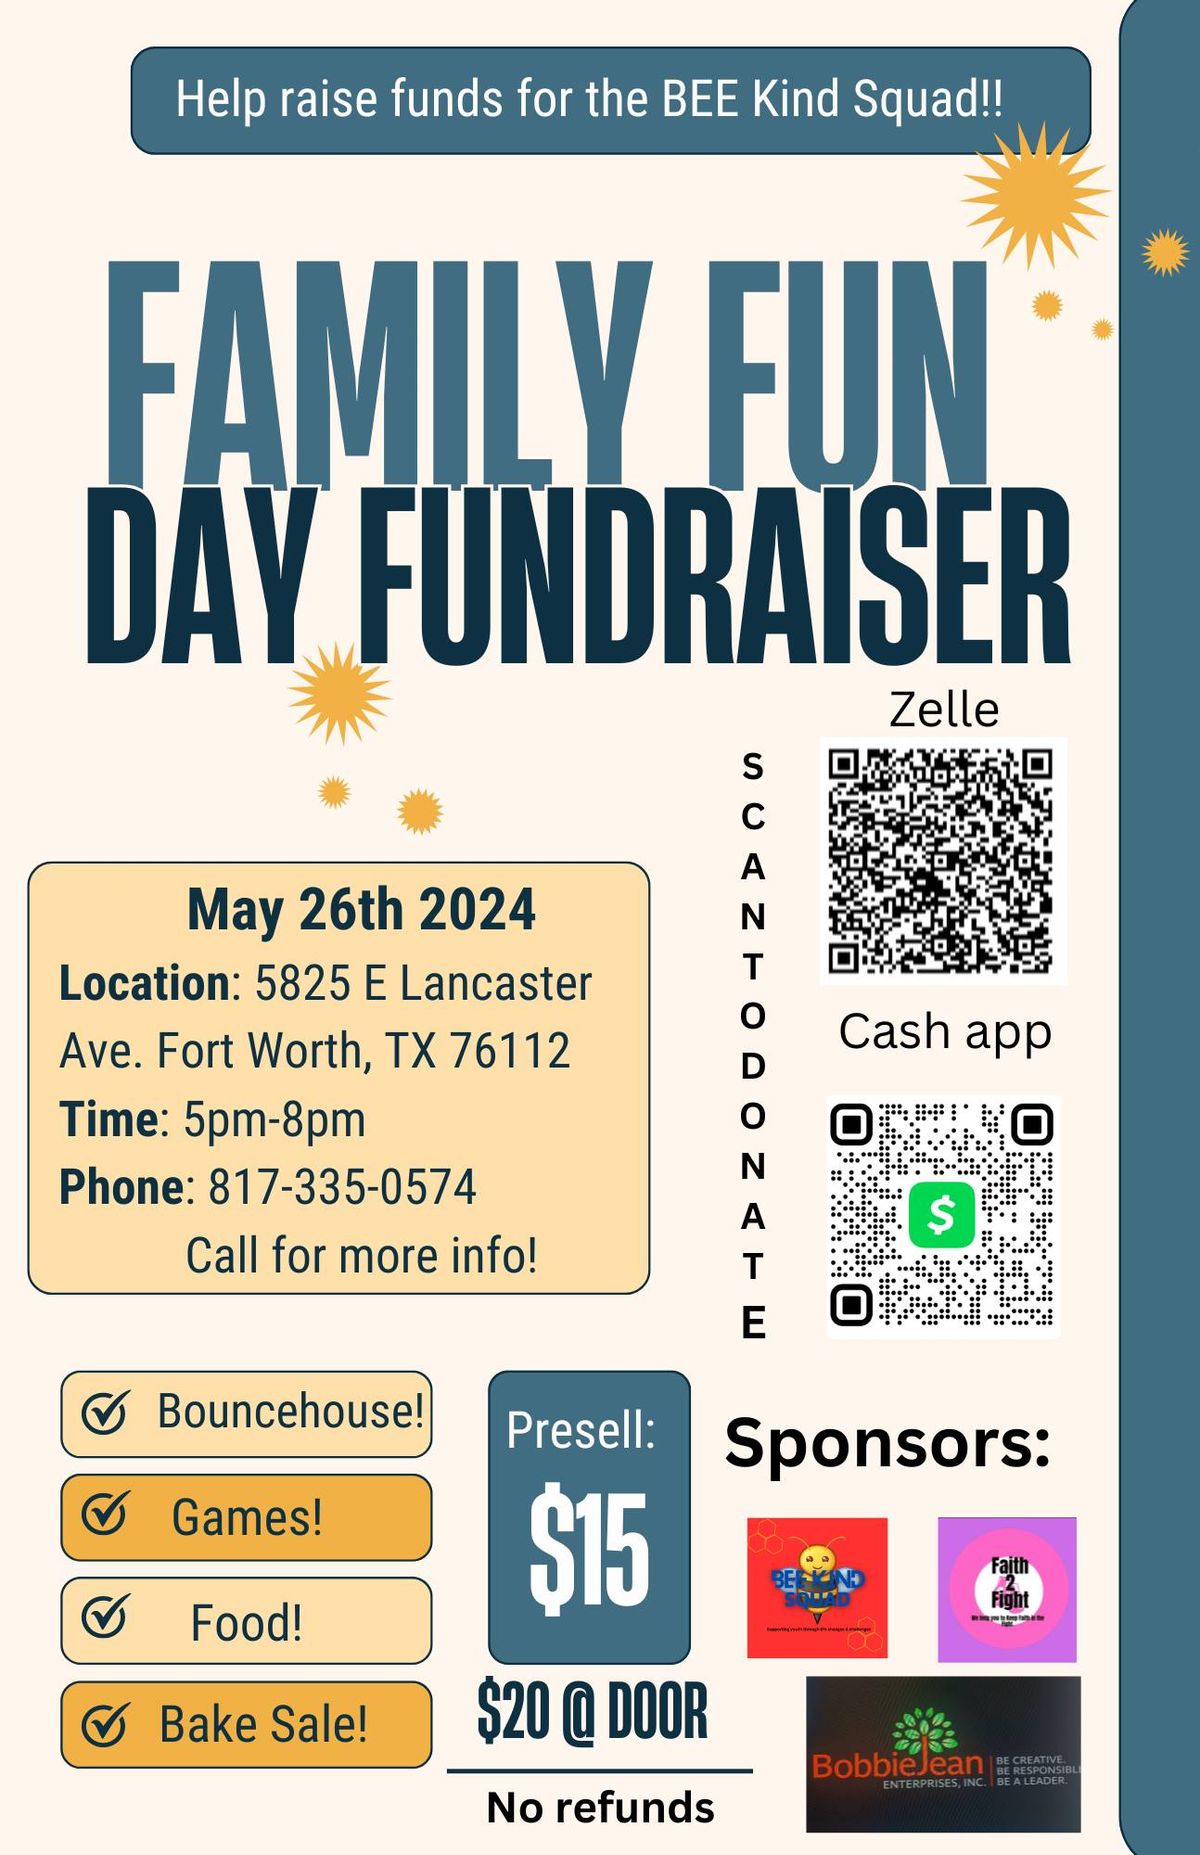 BEE Kind Squad's Family Fun Day Fundraiser